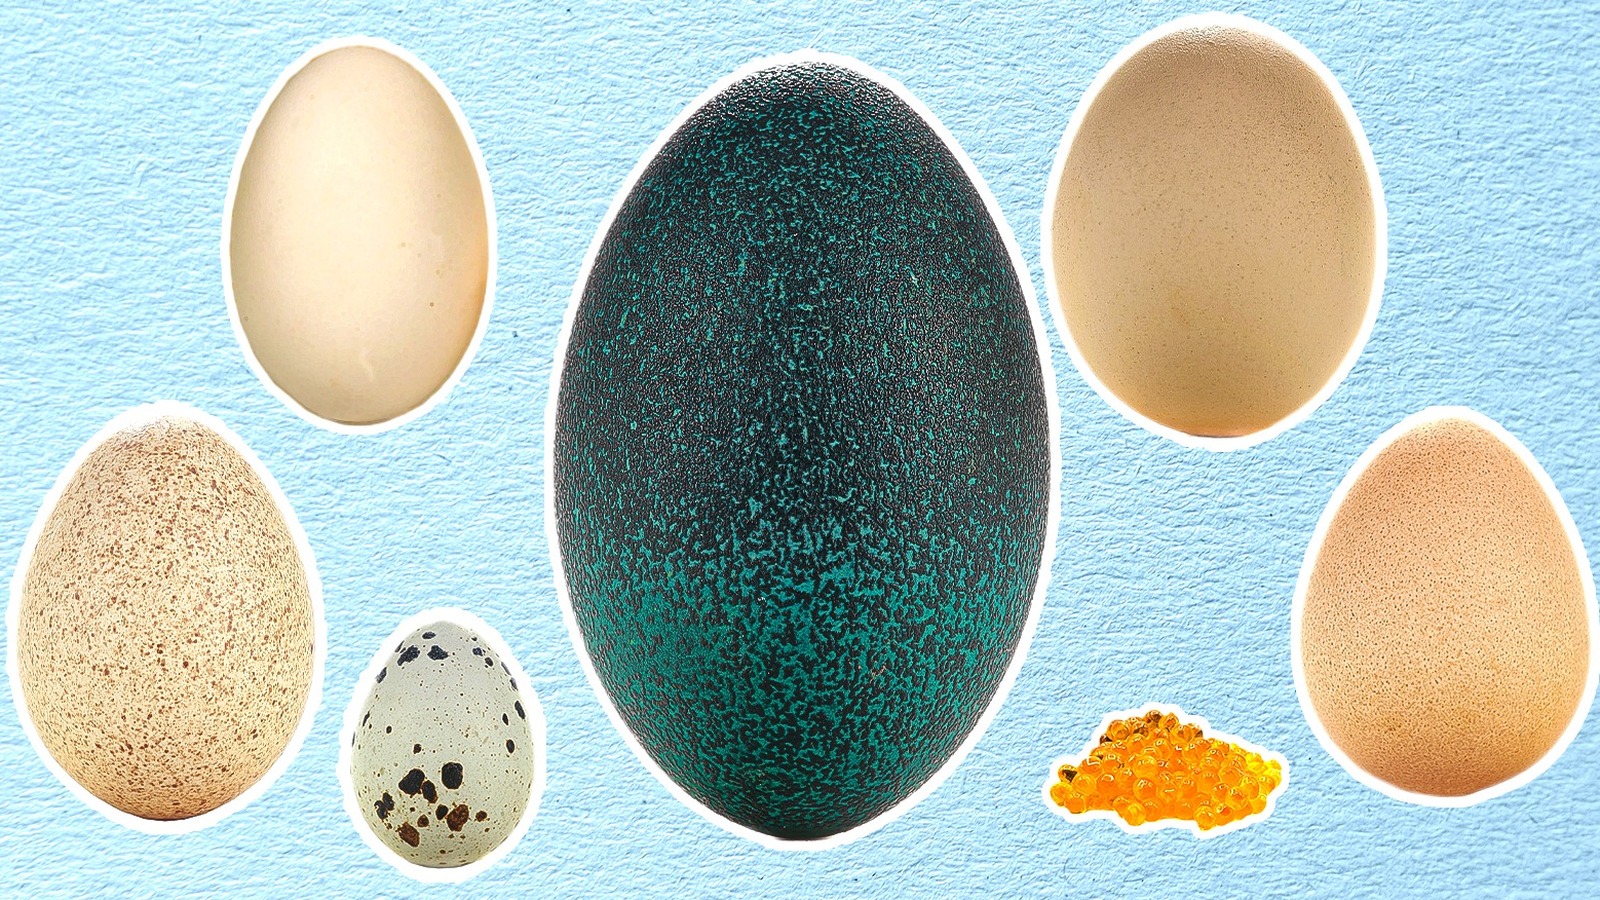 Ostrich Vs. Chicken Eggs: Which Is More Nutritious?